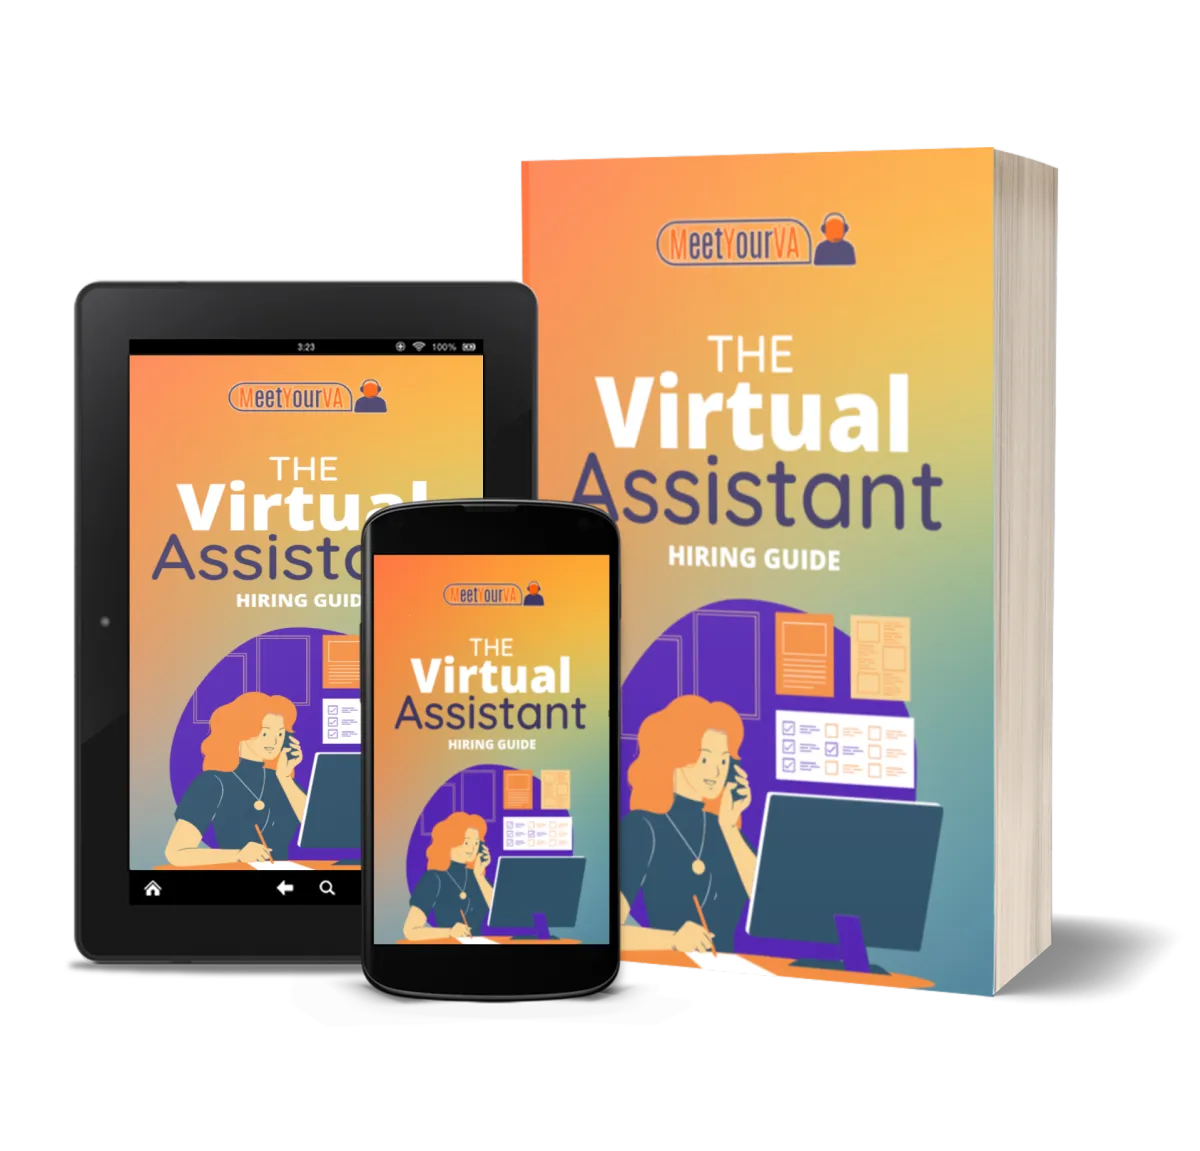 The Virtual Assistant Guide